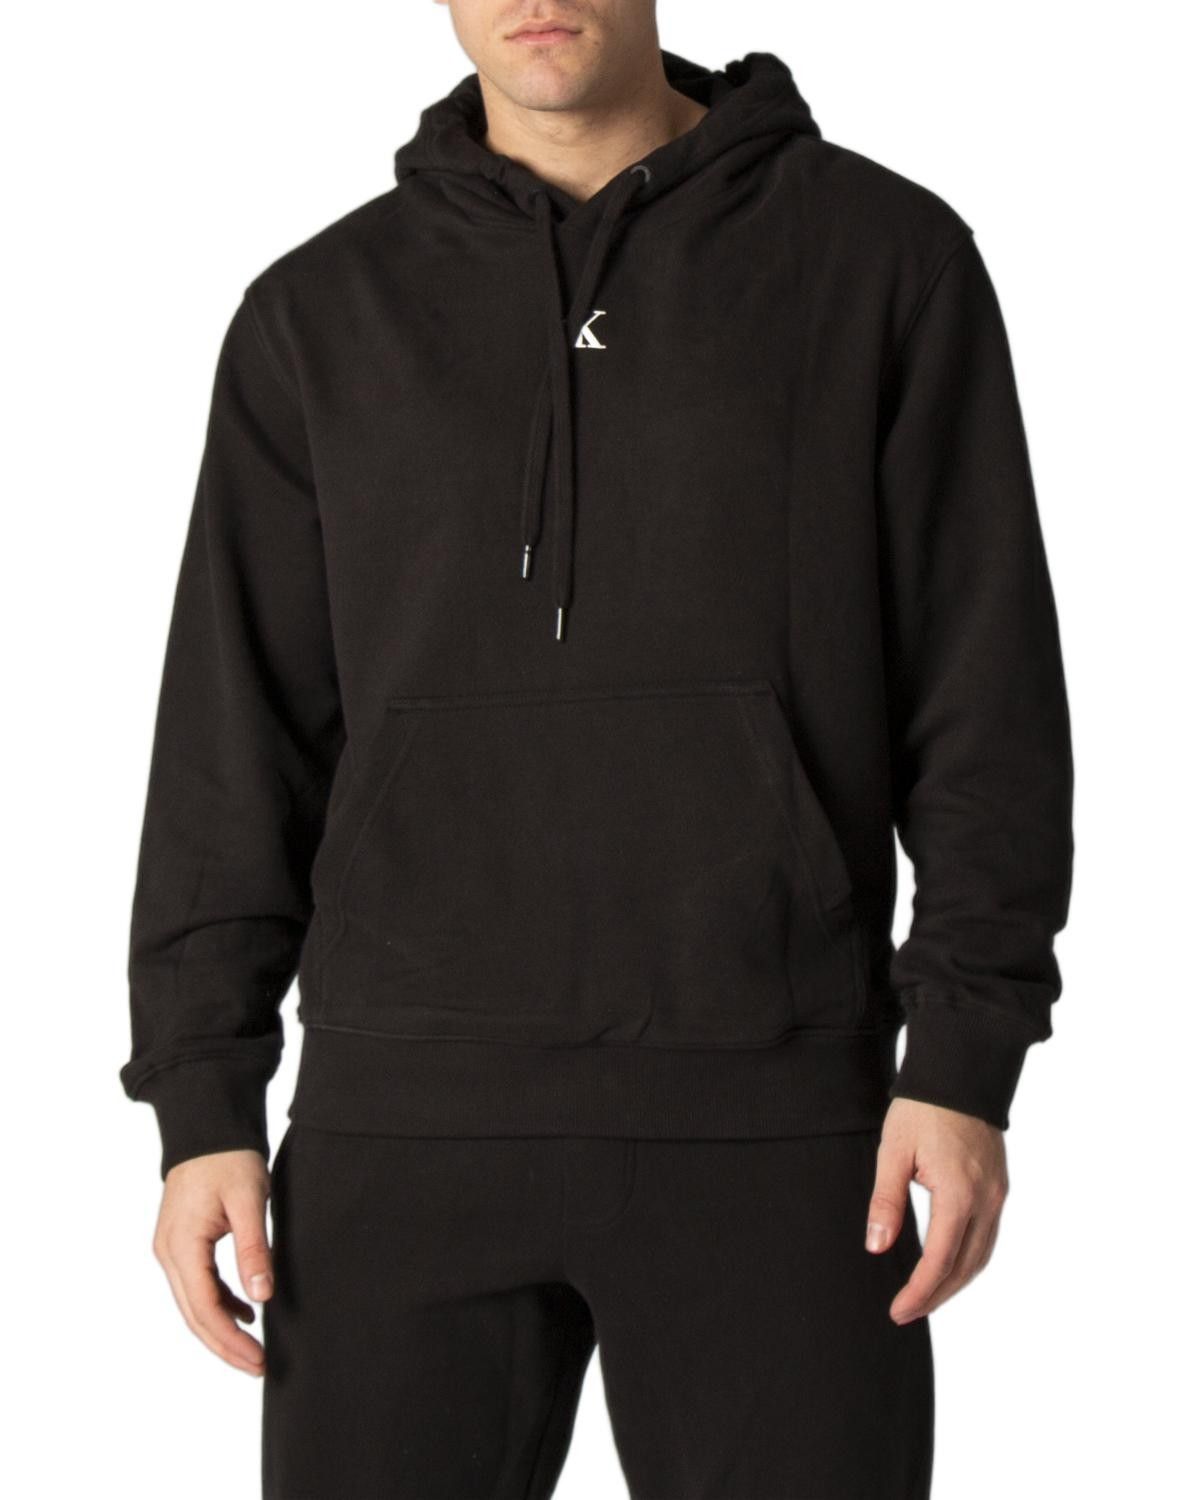 Brand: Calvin Klein Jeans
Gender: Men
Type: Sweatshirts
Season: Spring/Summer

PRODUCT DETAIL
• Color: black
• Pattern: print
• Sleeves: long
• Collar: hood

COMPOSITION AND MATERIAL
•  Washing: machine wash at 30°